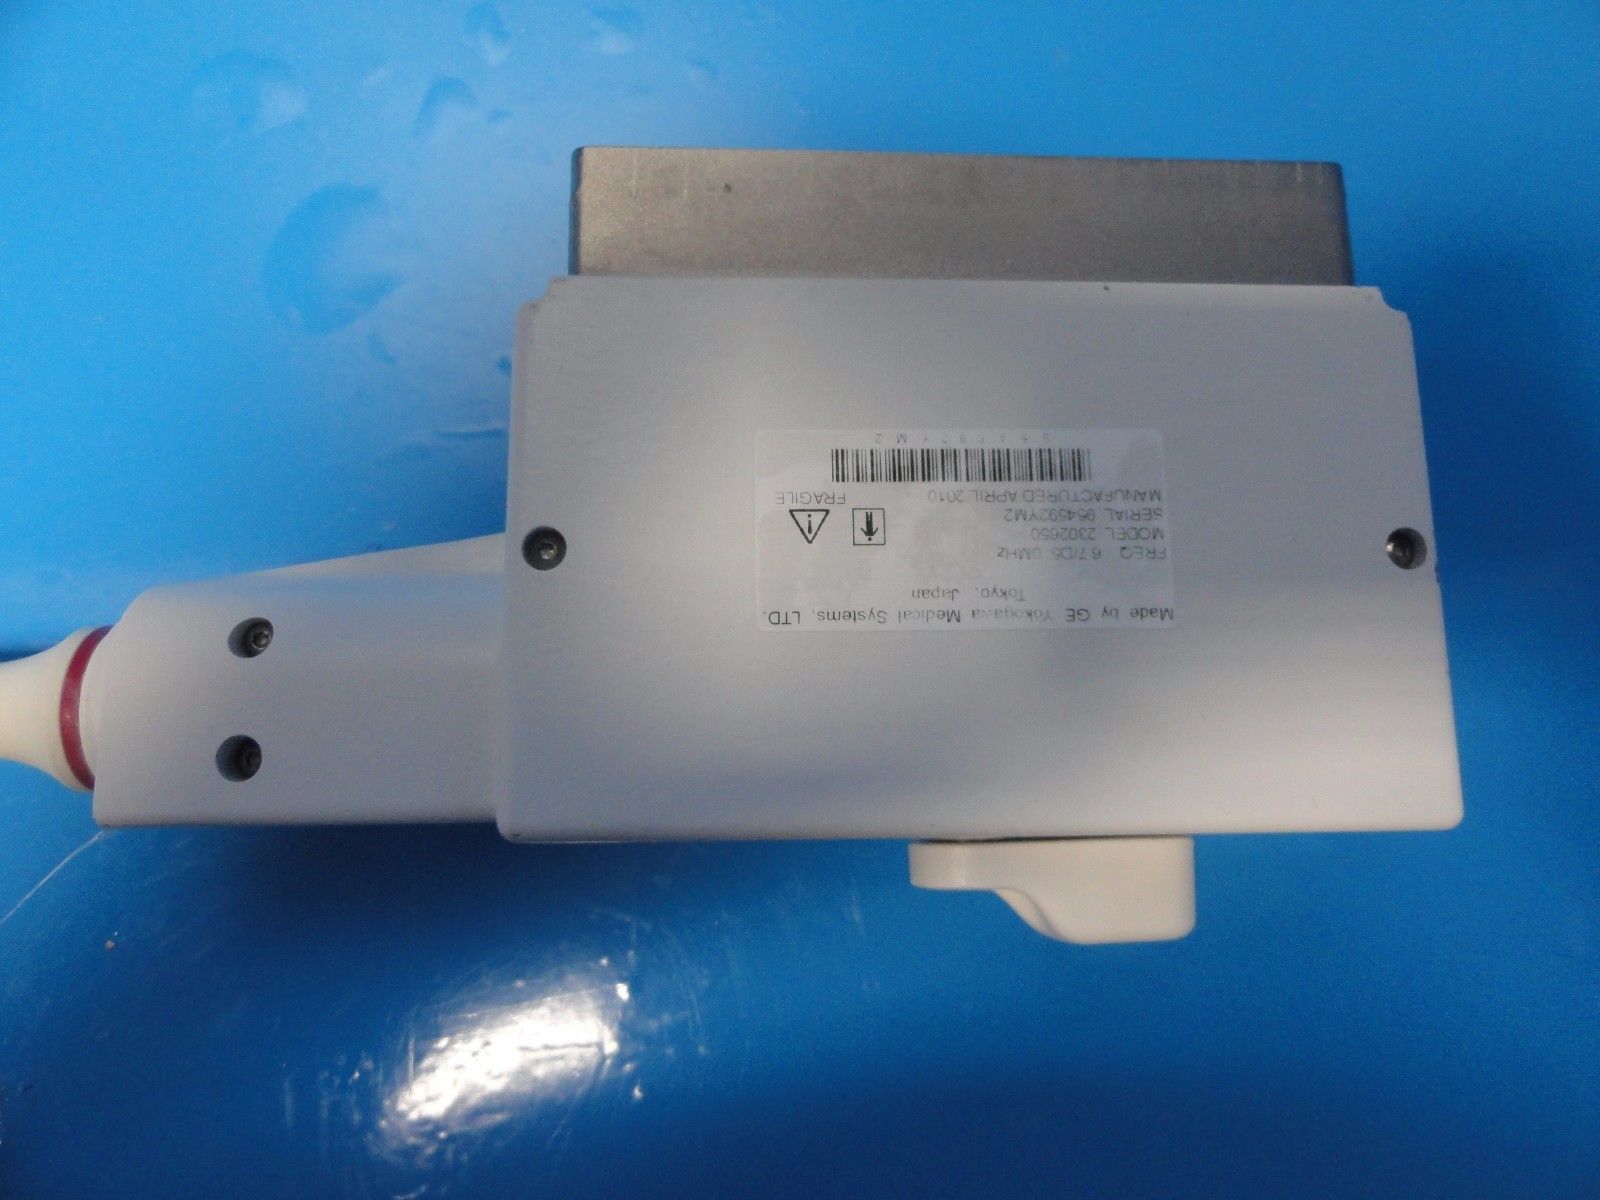 2010 GE 10L P/N 2302650 Linear Array Probe For GE Logiq & Vivid Series ~13712 DIAGNOSTIC ULTRASOUND MACHINES FOR SALE